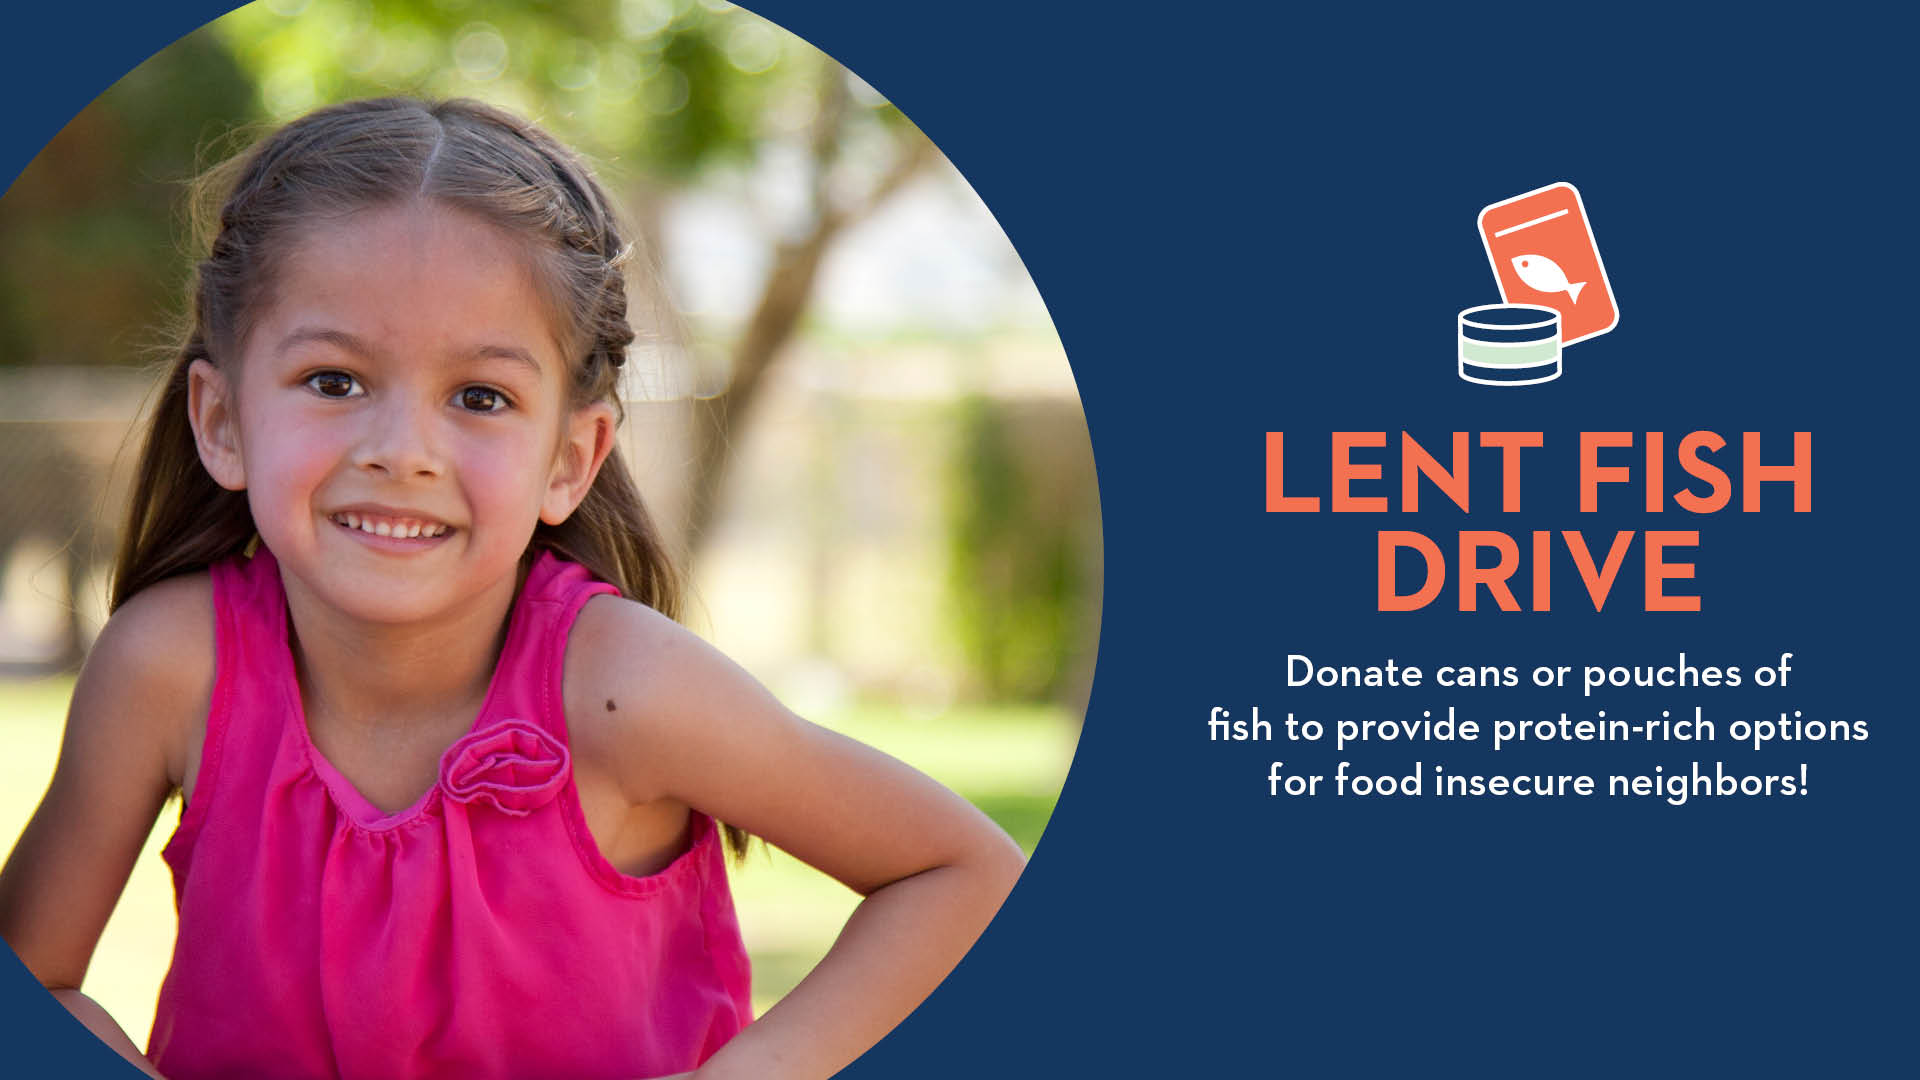 Help provide meals with the Lent Fish Drive